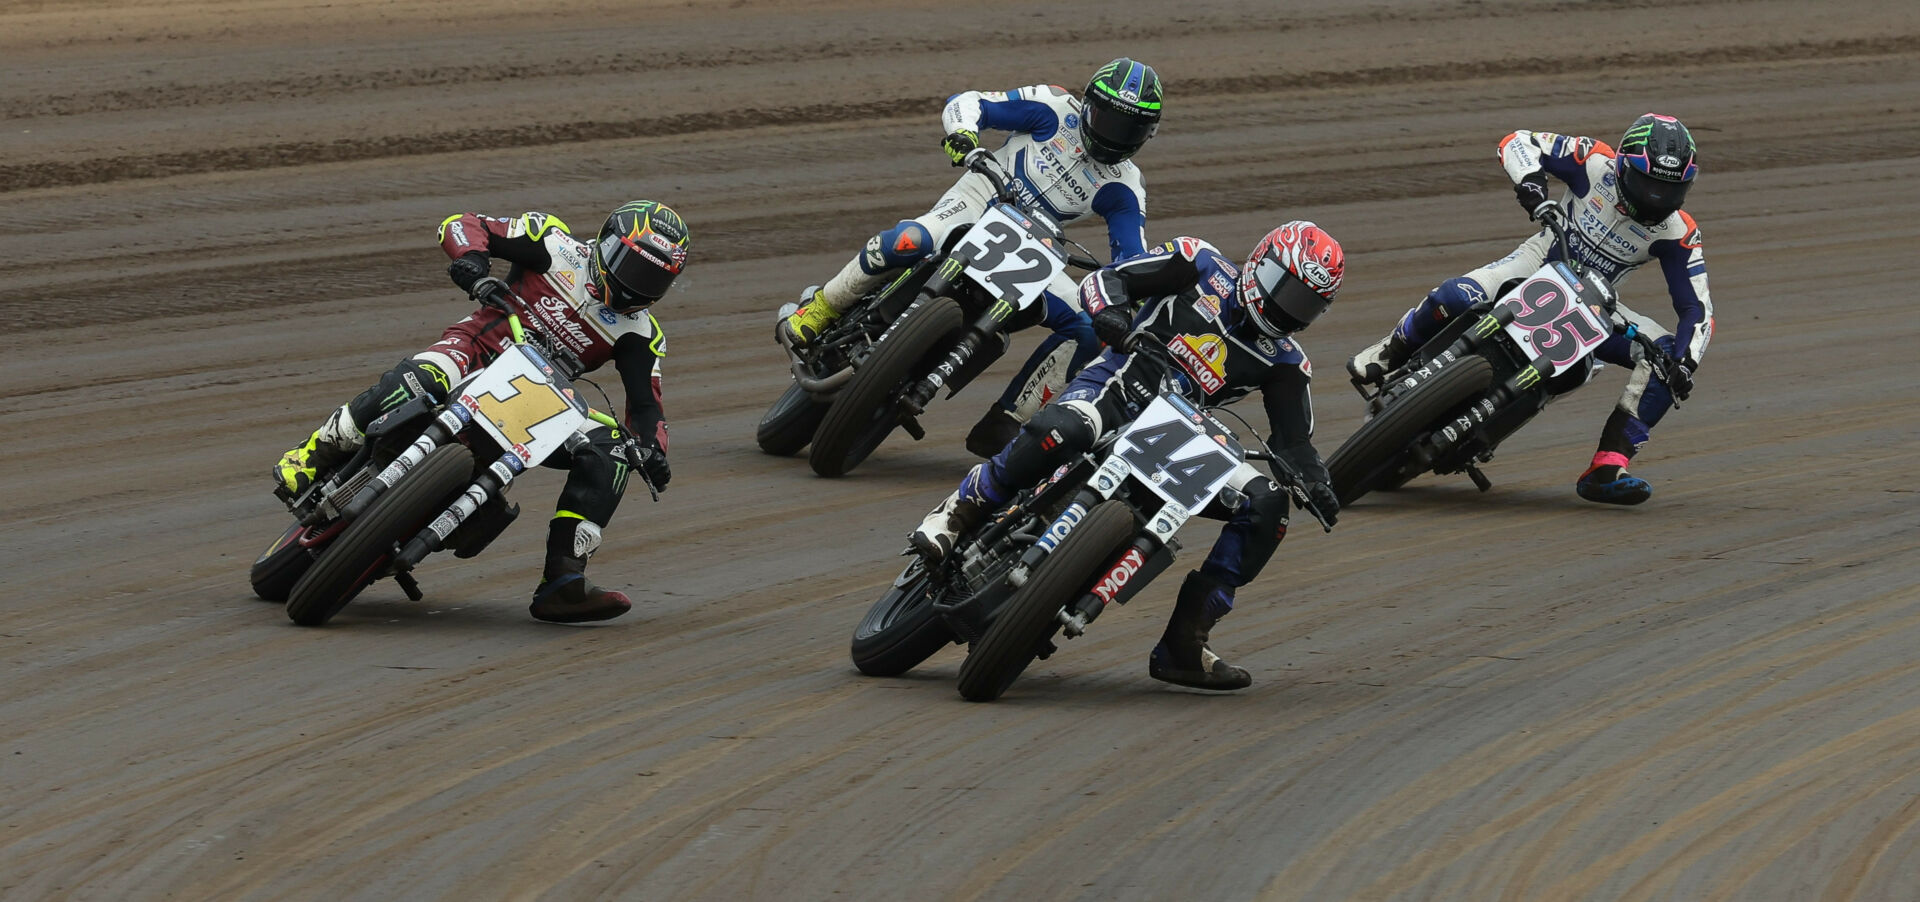 Jared Mees (1), Dallas Daniels (32), Brandon Robinson (44), and JD Beach (95) in action at the Springfield Mile in 2022. Photo by Brian J. Nelson, courtesy AMA Pro Racing.